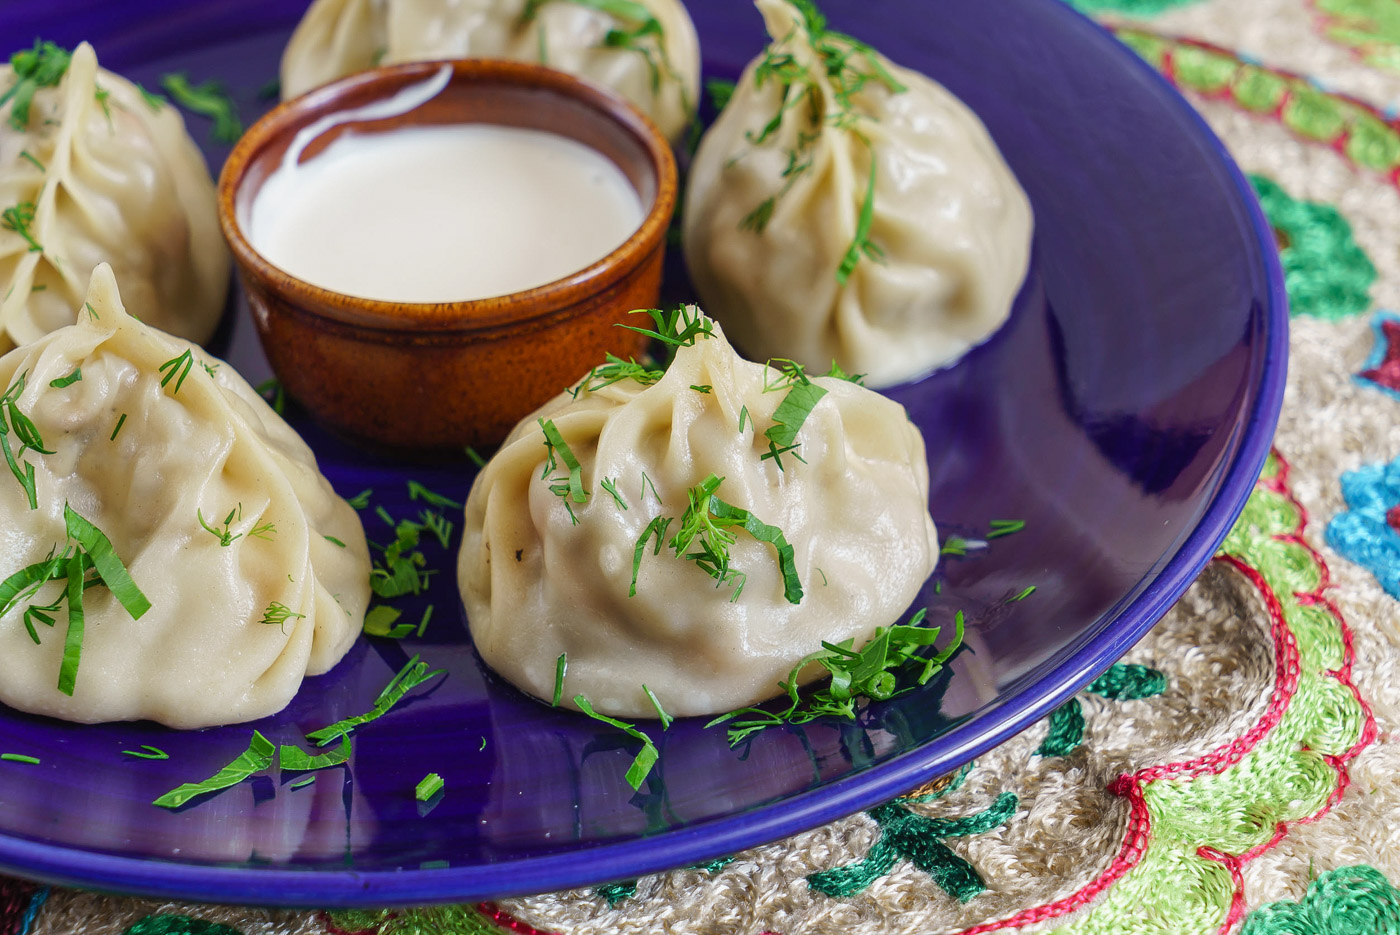 This soecialty is buuz, steamed dumplings filled with mutton